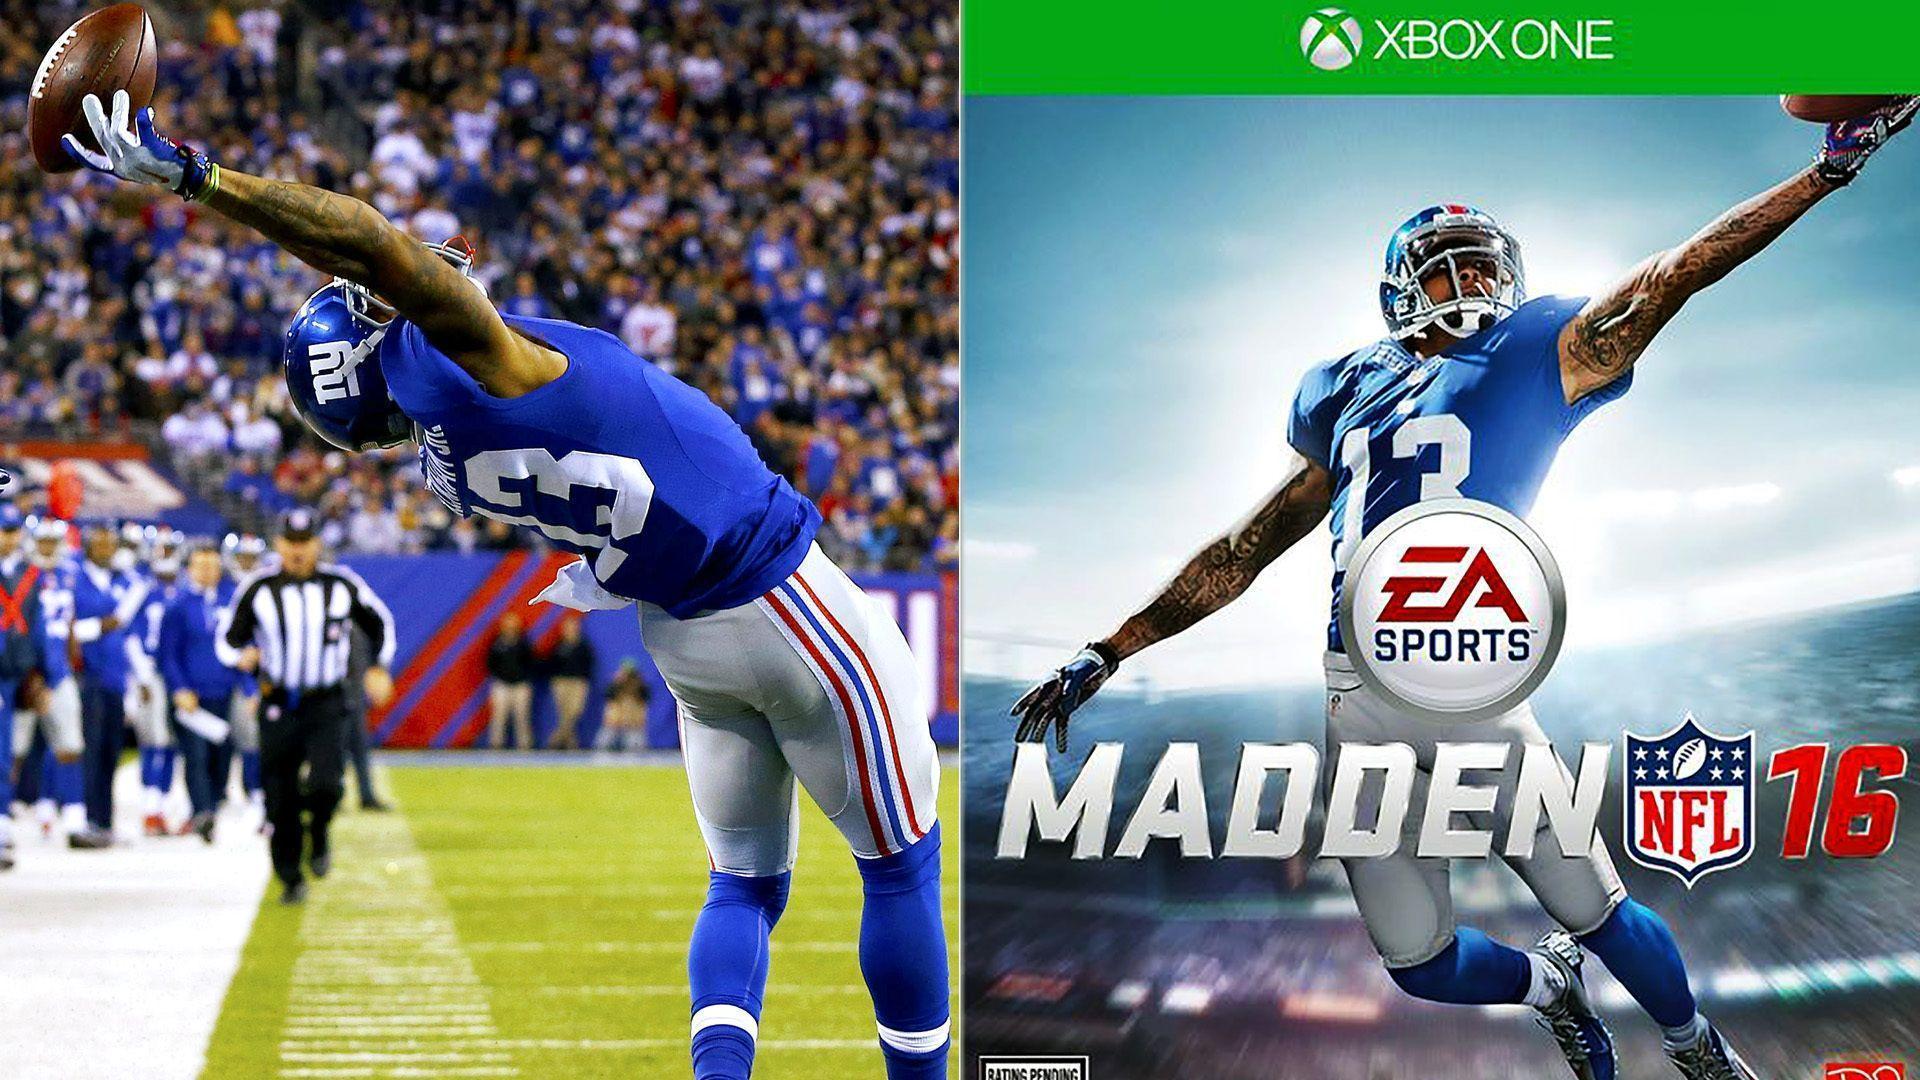 Odell Beckham Jr. Makes Another One Handed Catch In Madden 16